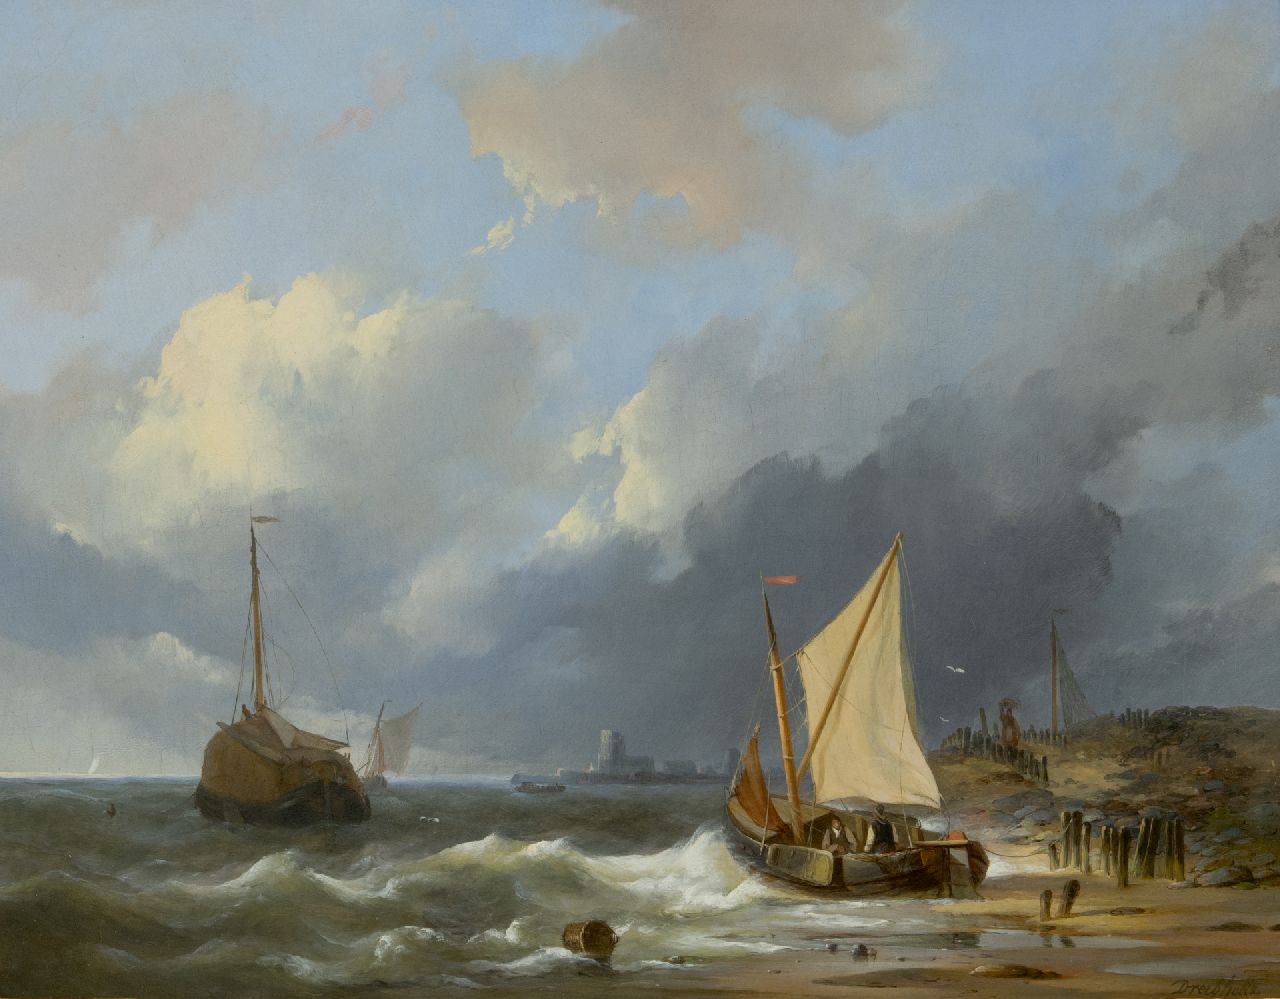 Dreibholtz C.L.W.  | Christiaan Lodewijk Willem Dreibholtz | Paintings offered for sale | Ships on the Zuiderzee, oil on panel 41.2 x 52.8 cm, signed l.r.